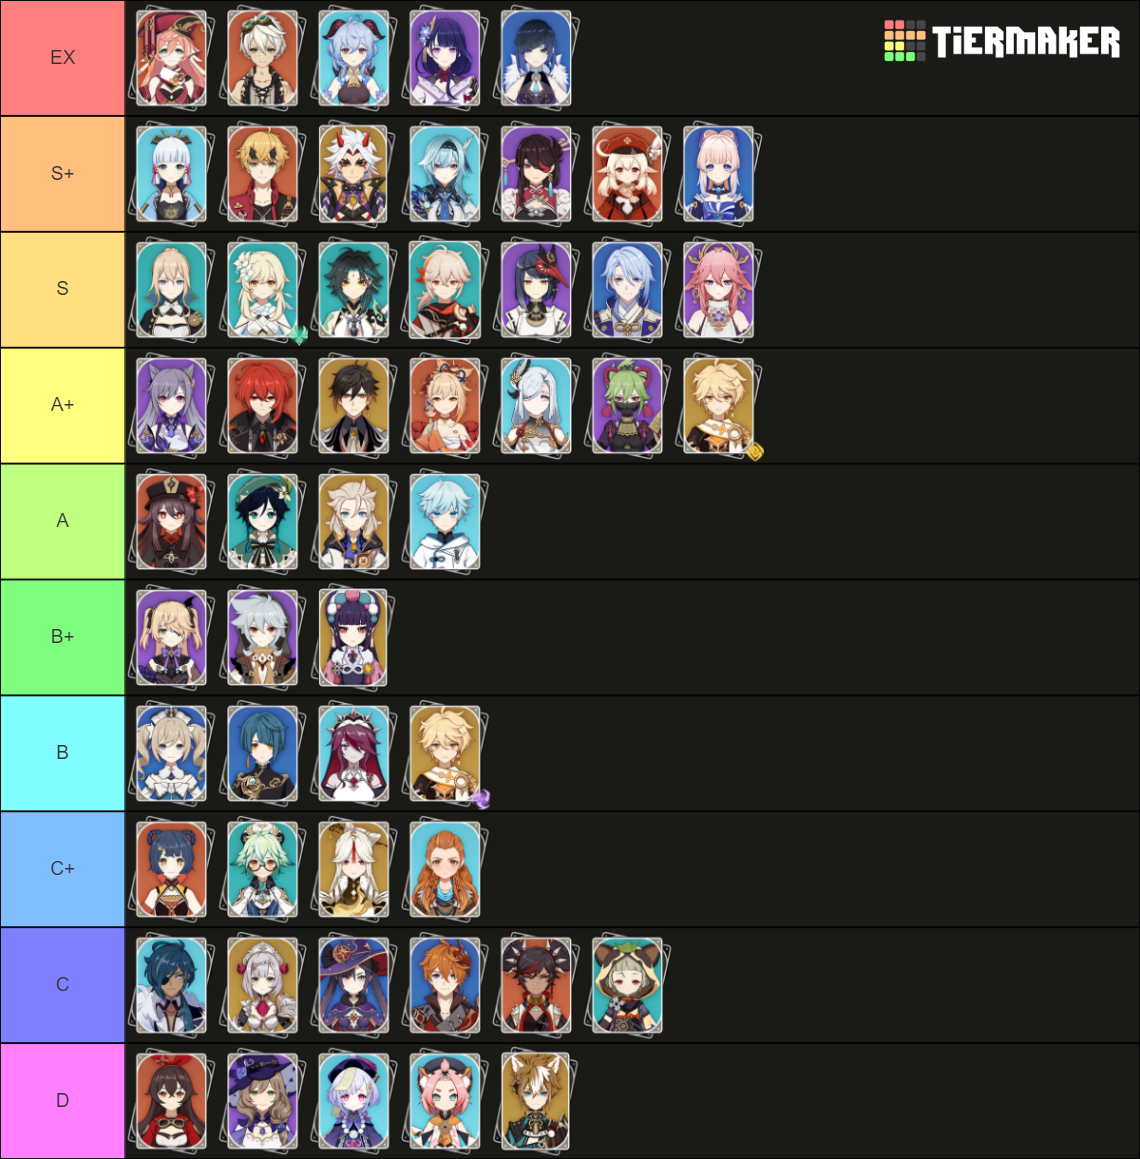 Hottest genshin impact characters tier list